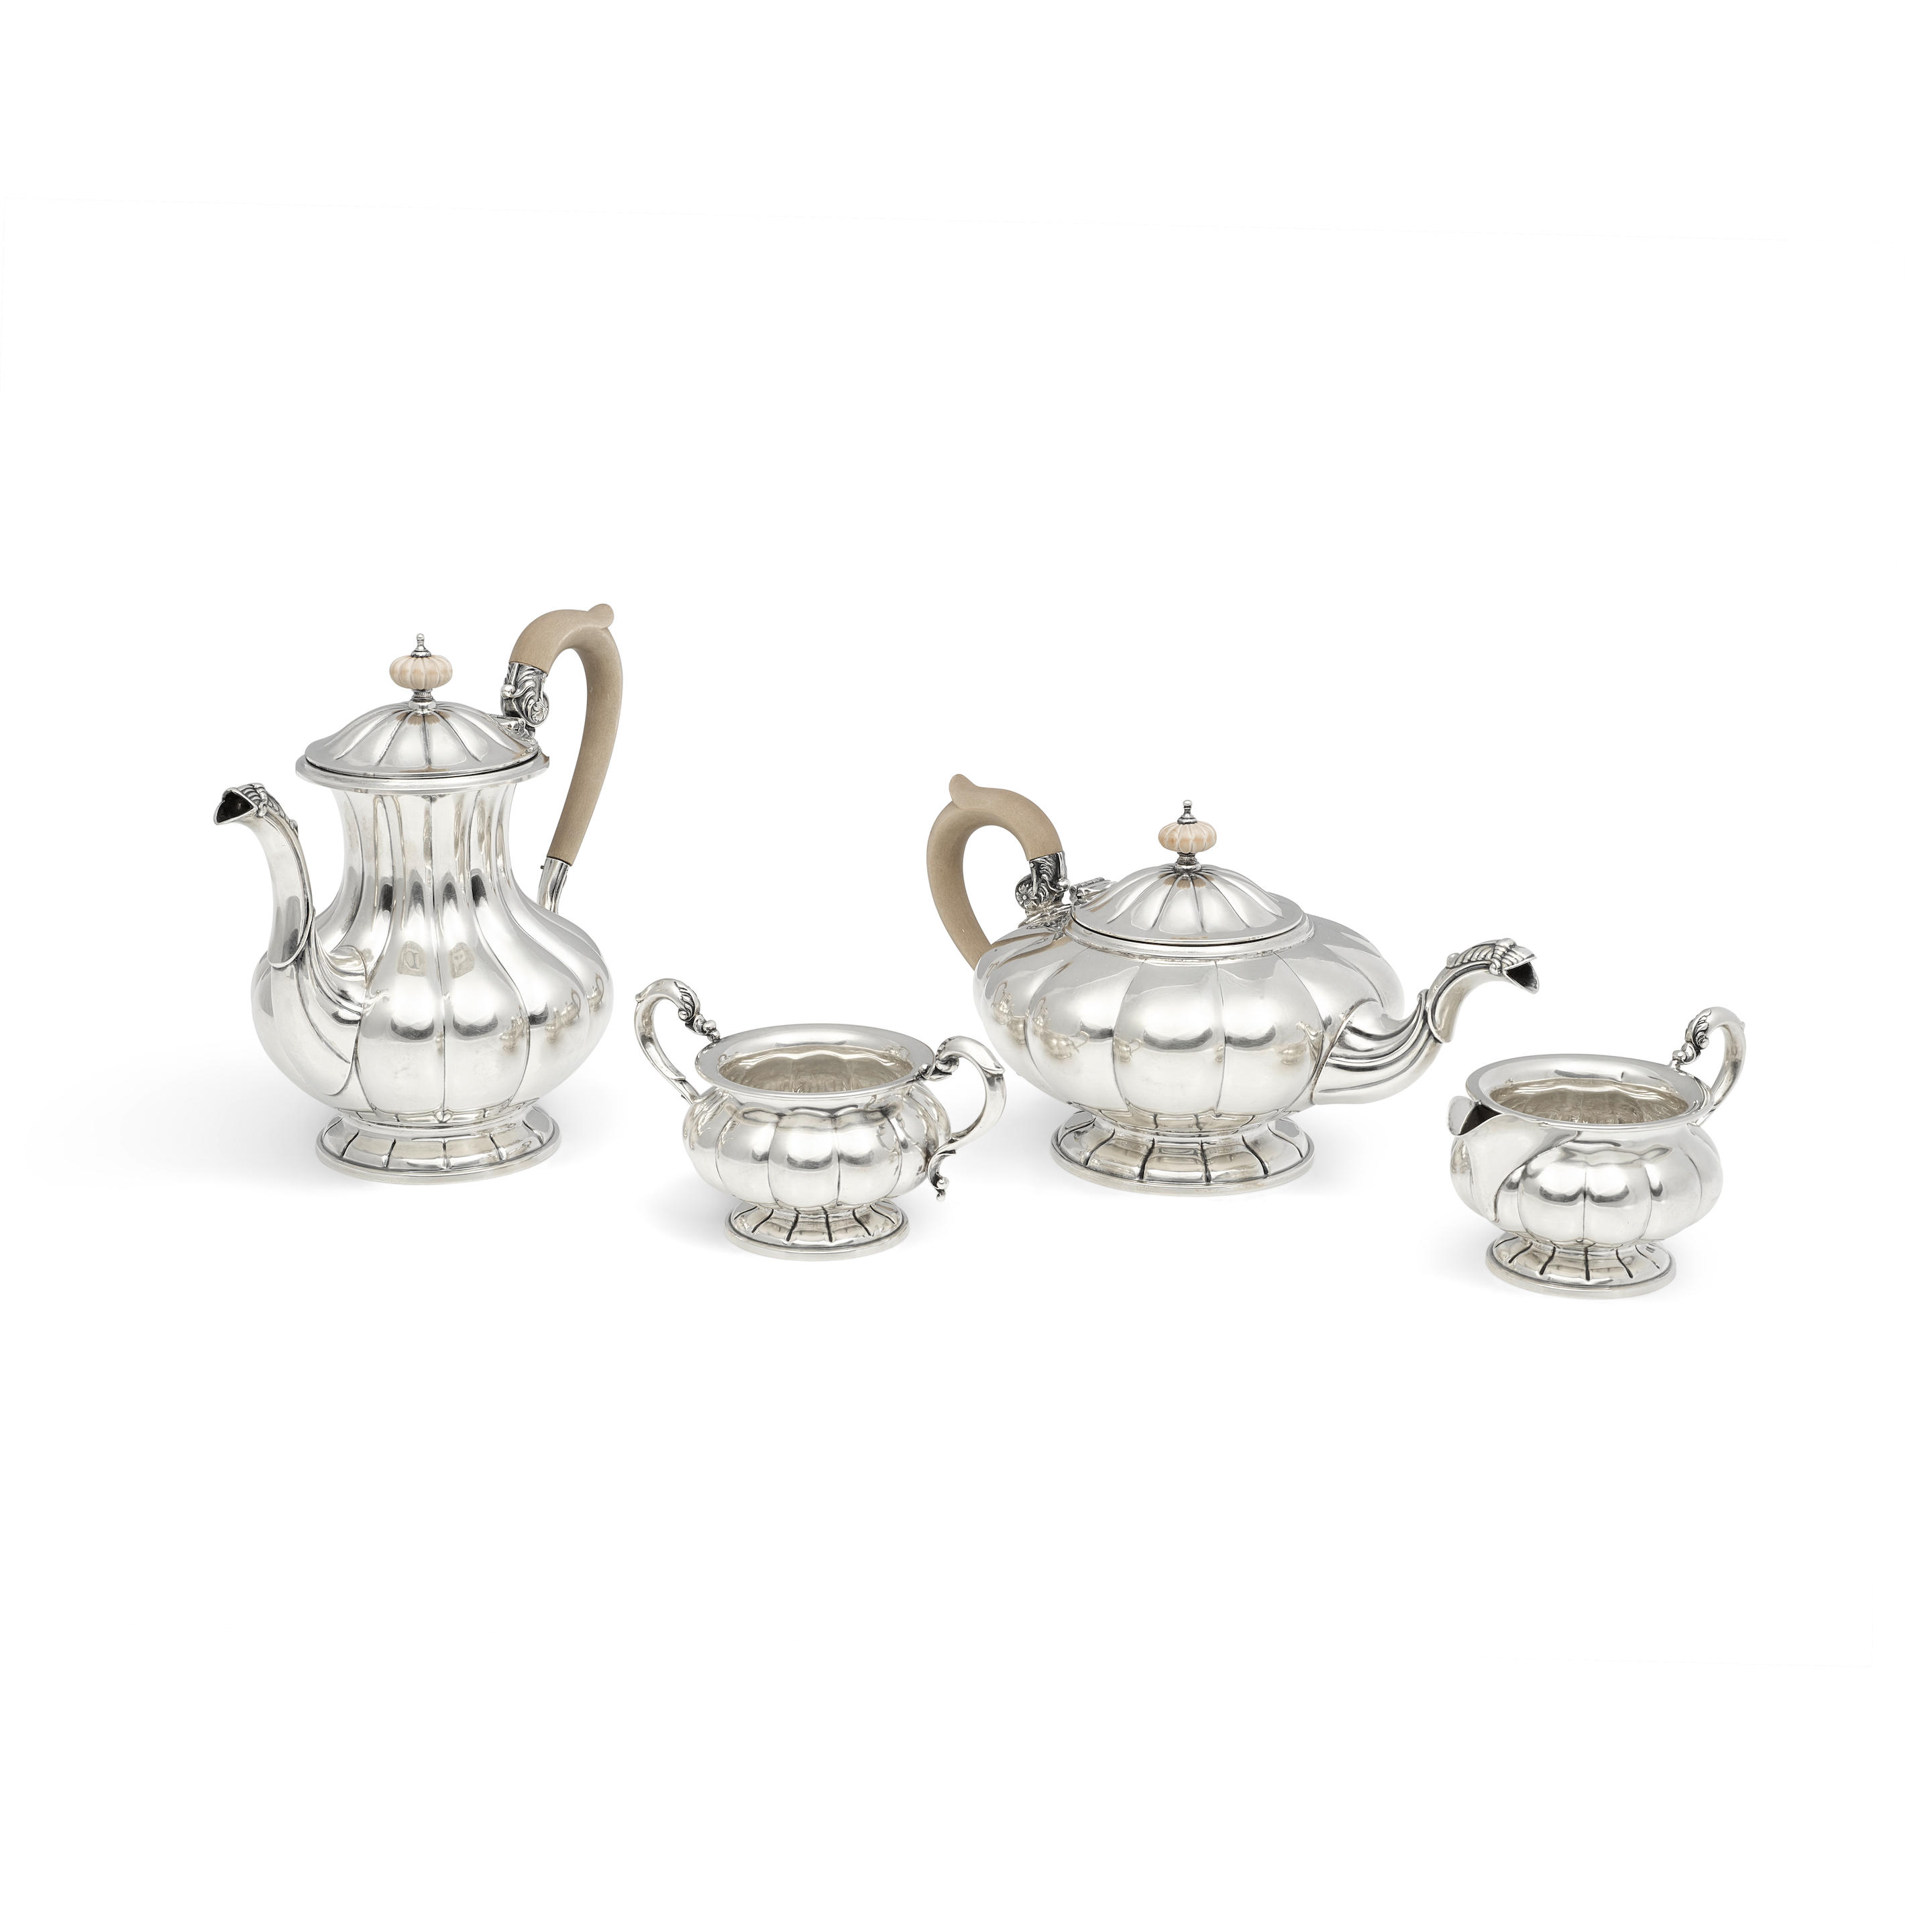 A Canadian sterling silver four-piece tea and coffee service